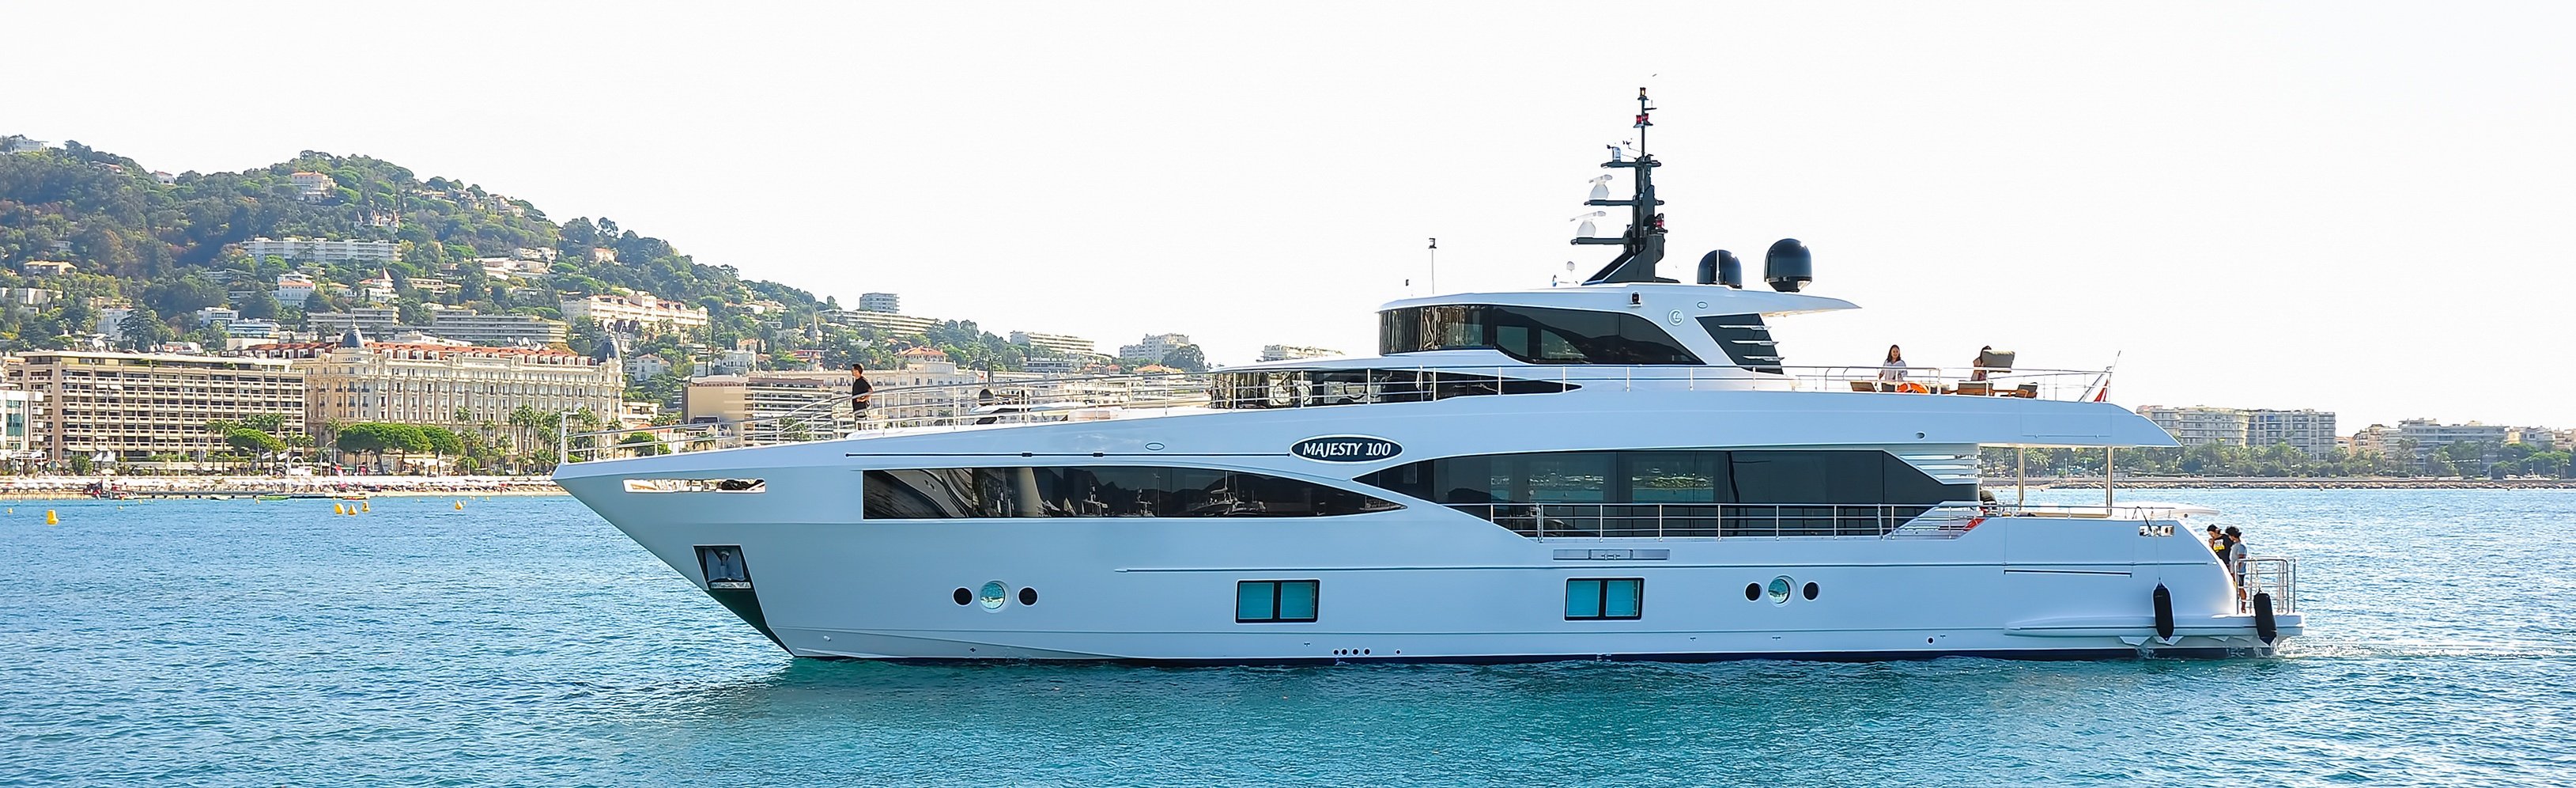 Majesty-100-as-it-enters-Cannes-Yachting-Festival.jpg